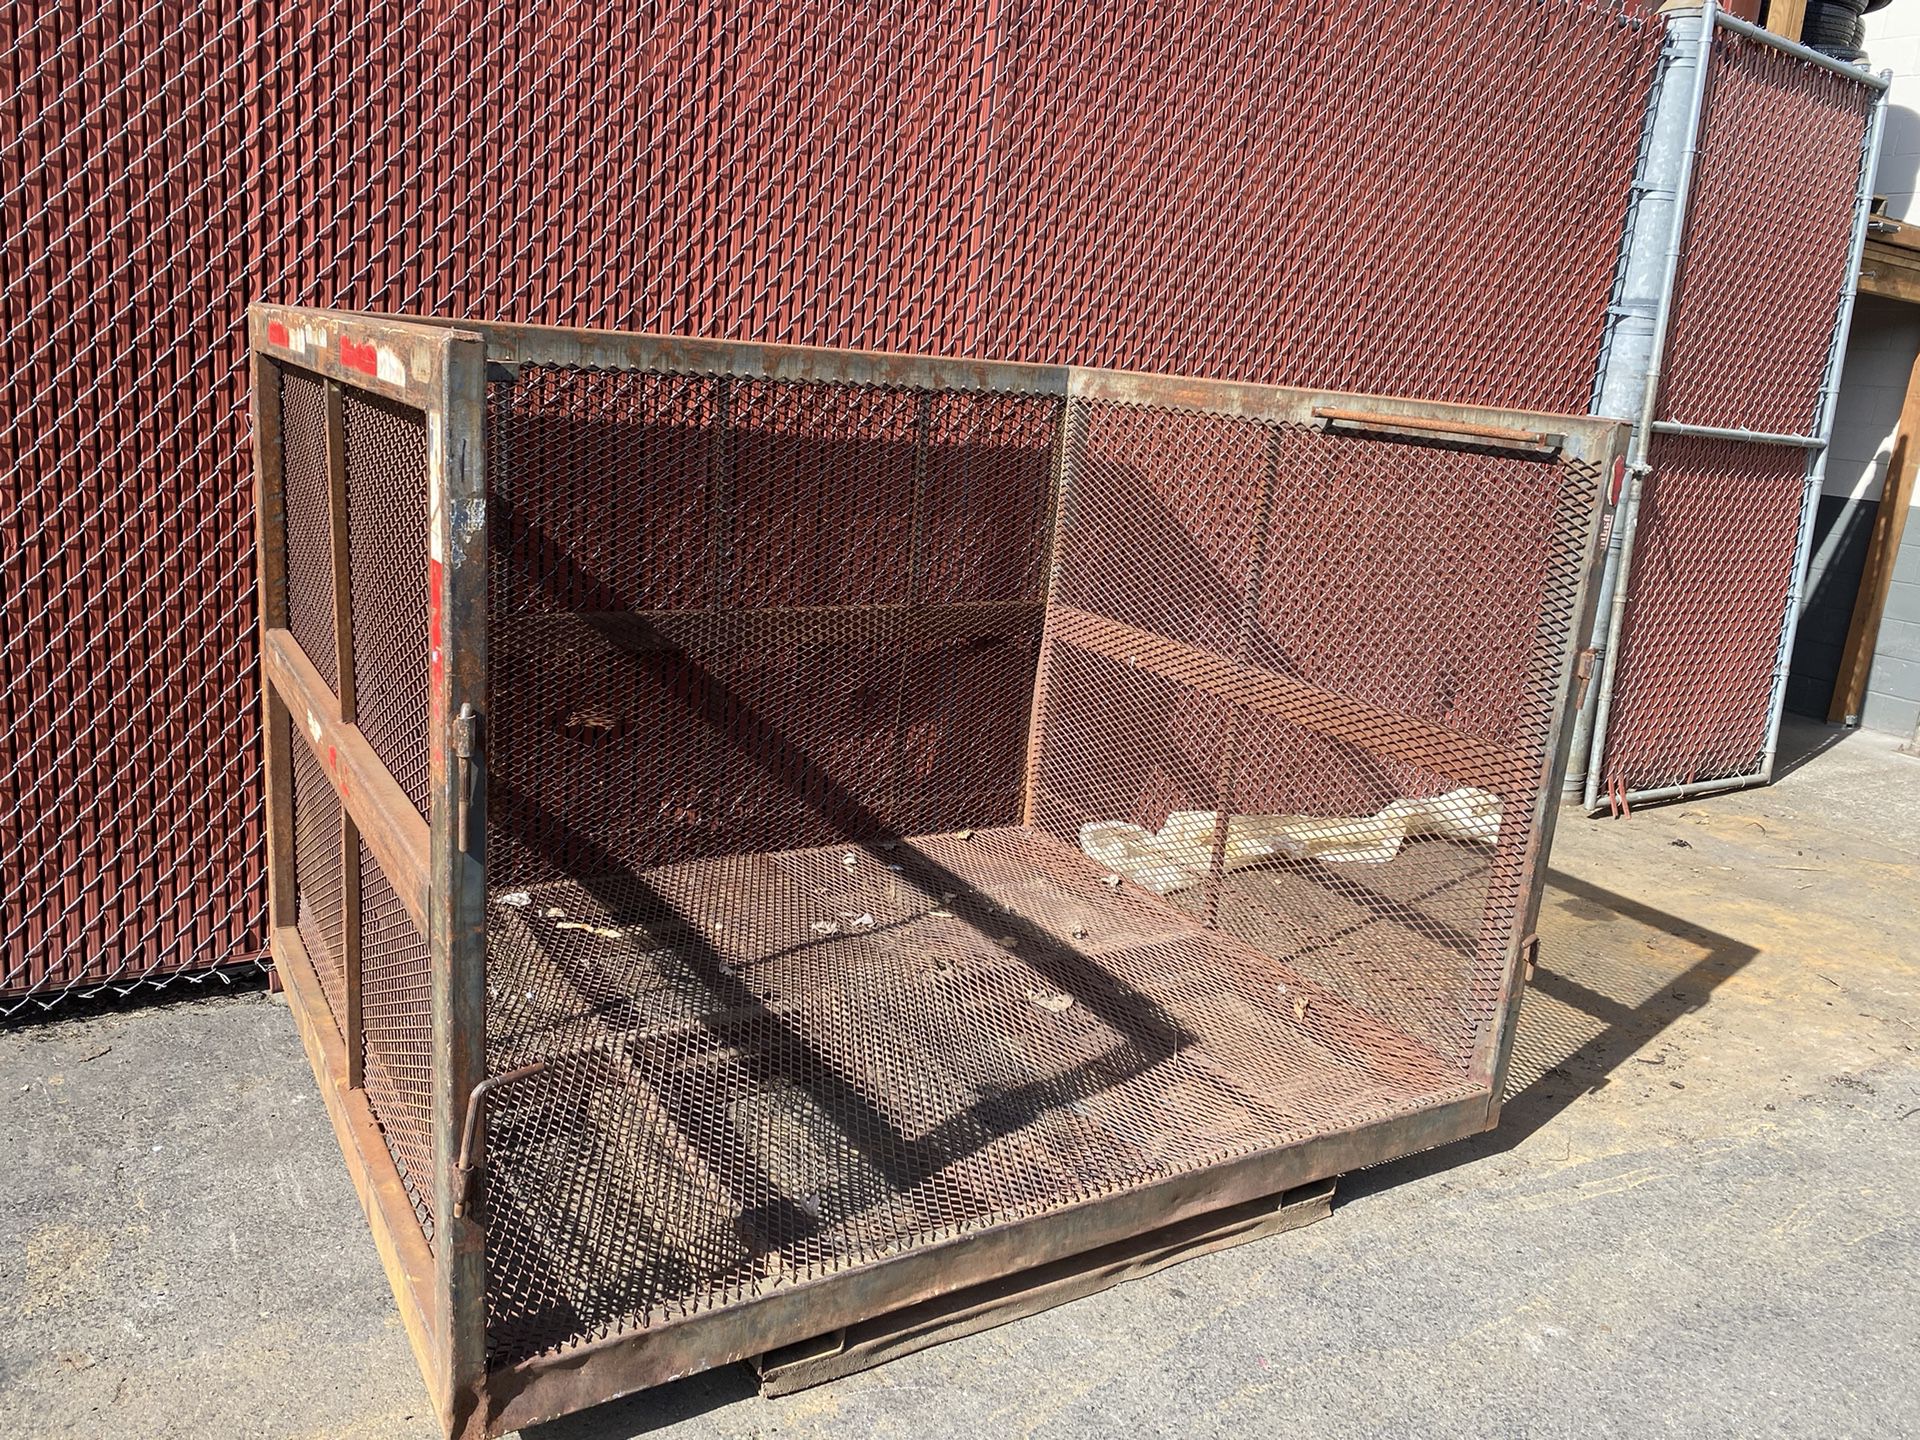 Heavy Duty 3 Sided Steel Container